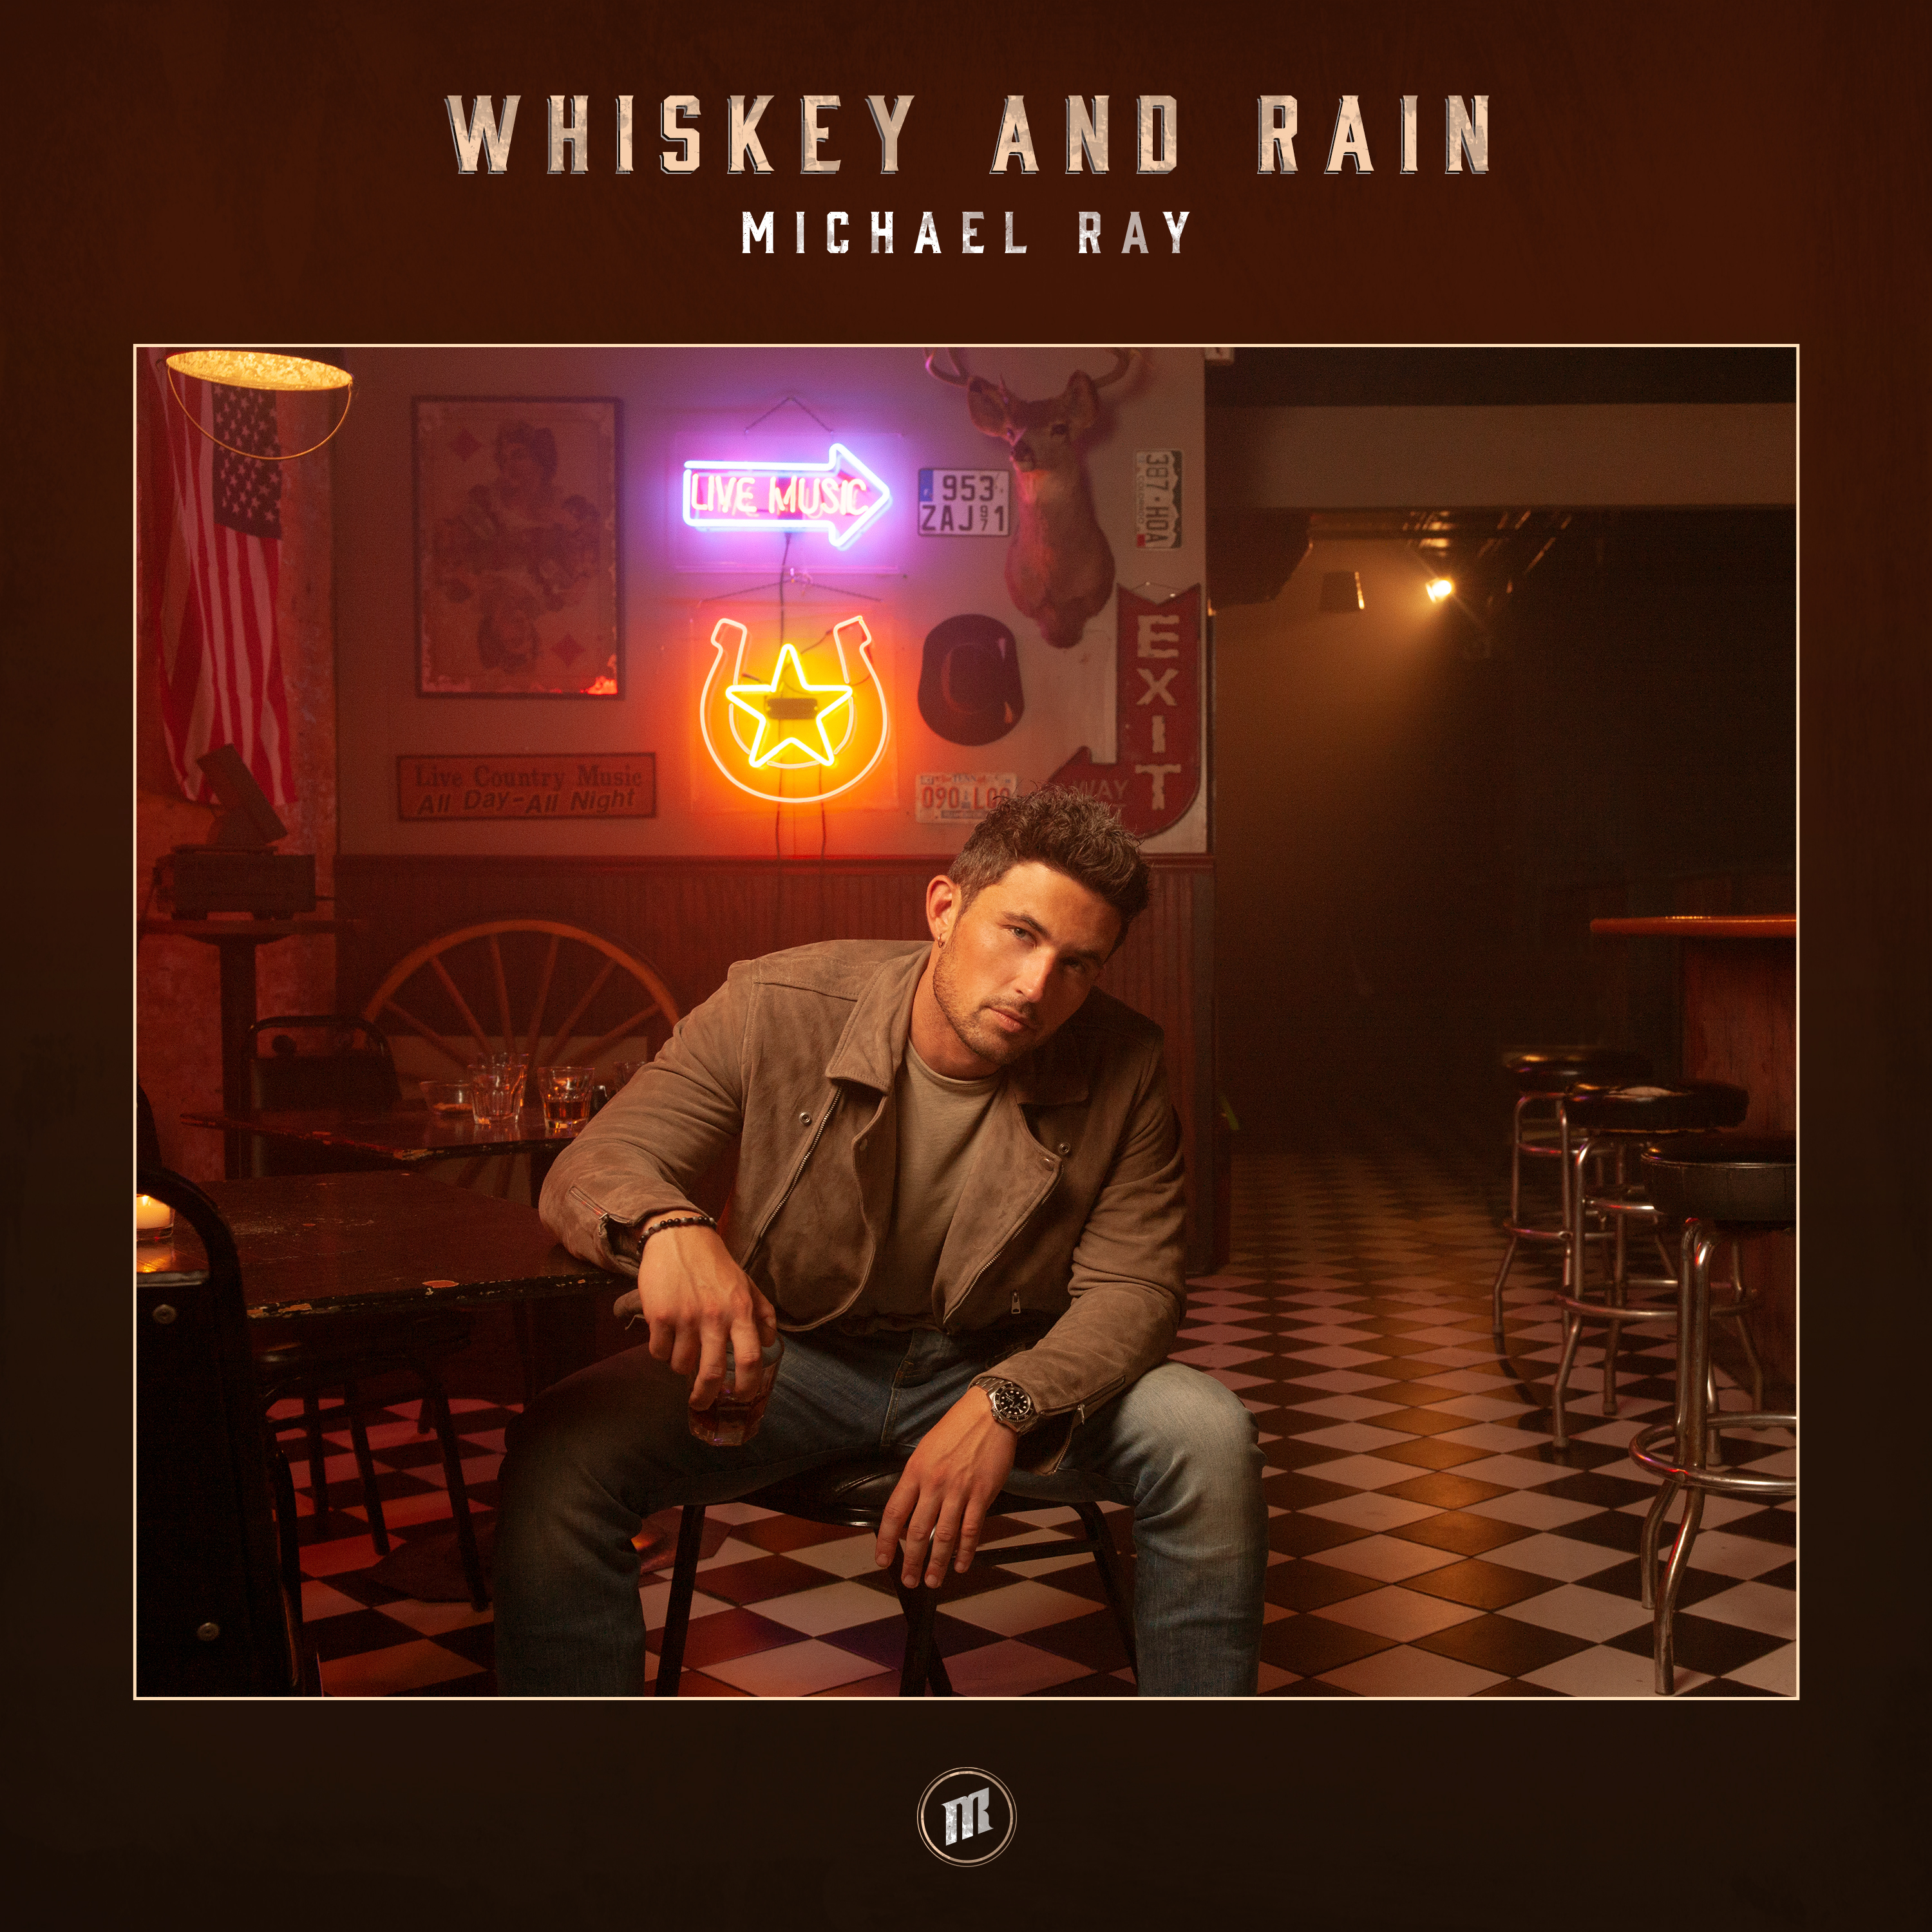 MICHAEL RAY RETURNS WITH NEW SINGLE "WHISKEY AND RAIN" THIS FRIDAY, SEPT. 25